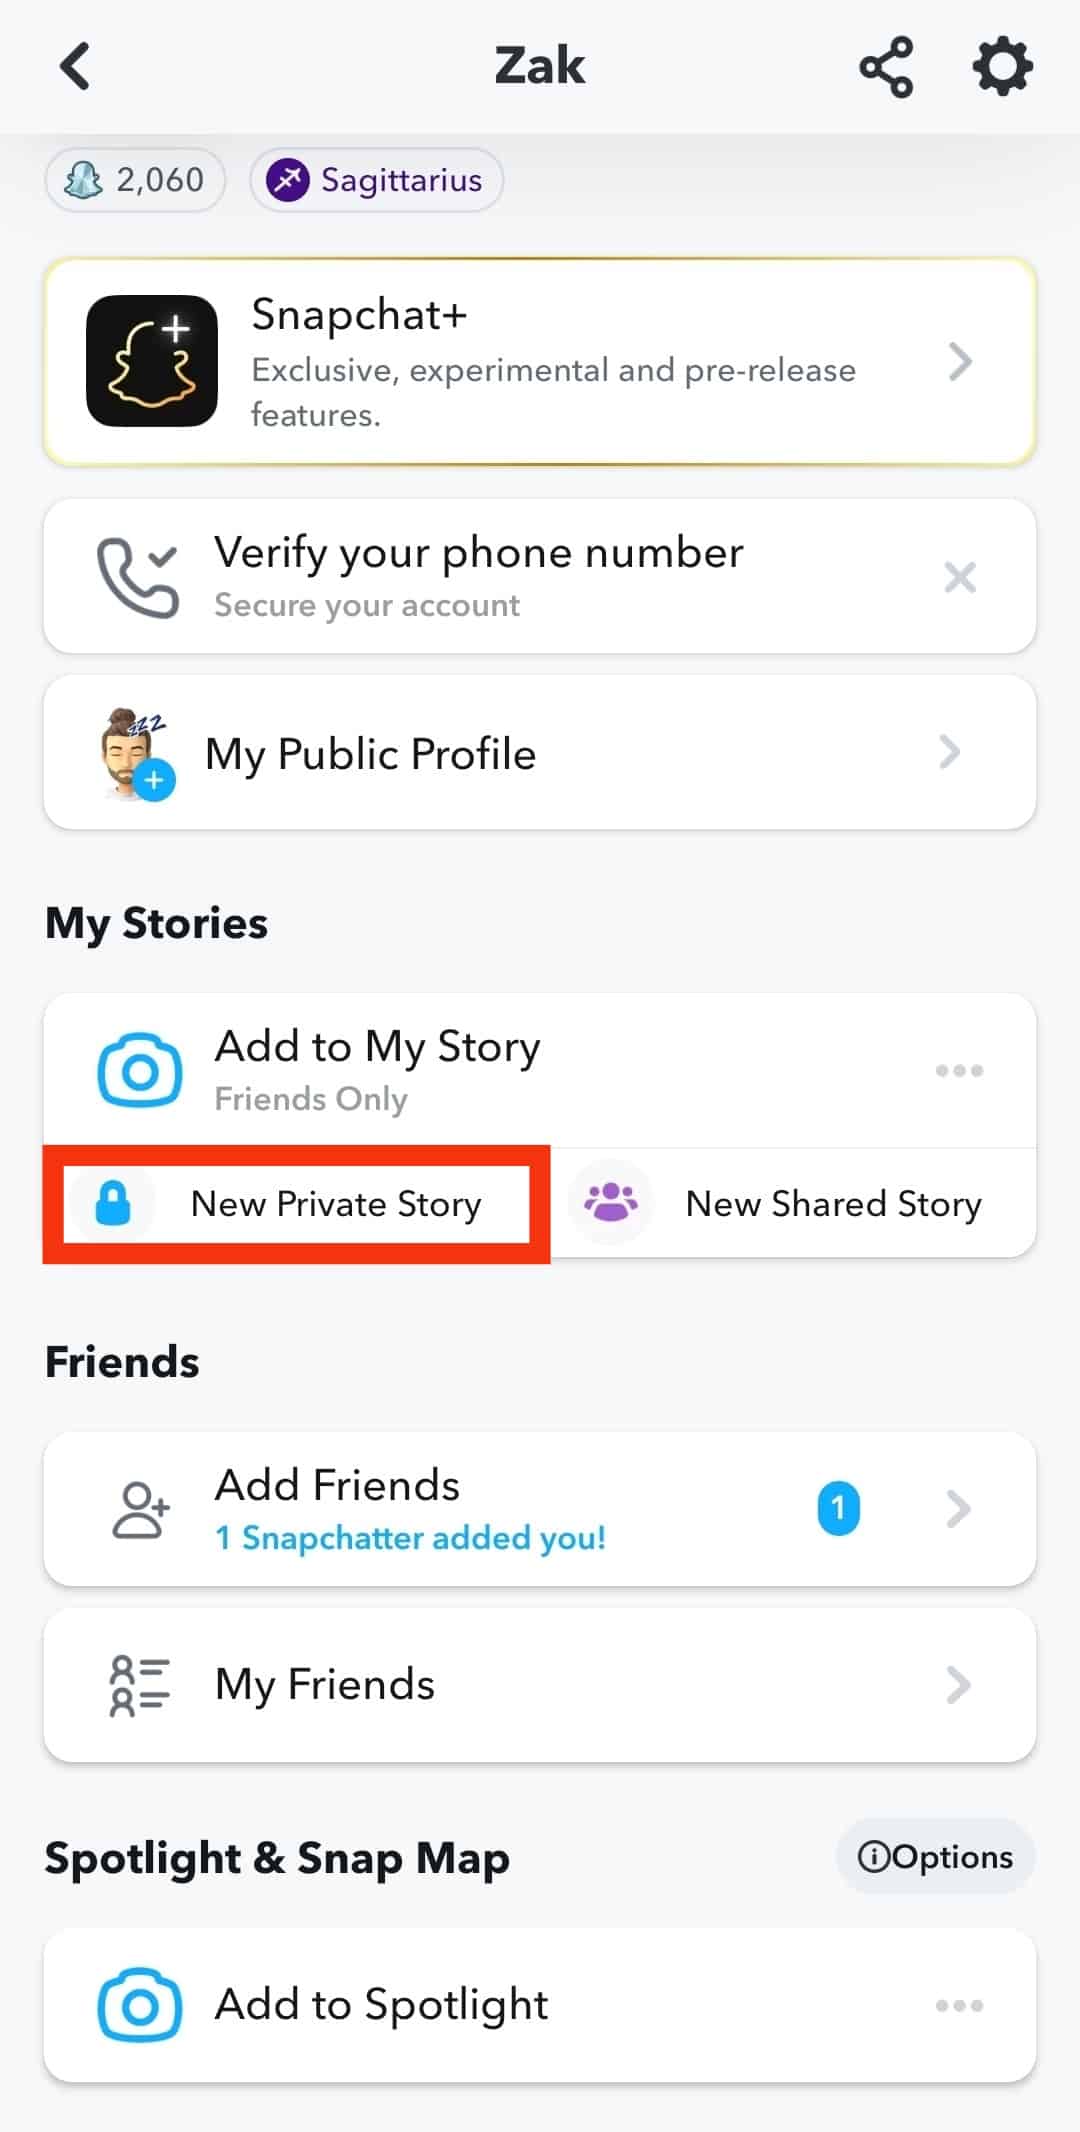 Select The New Private Story Option